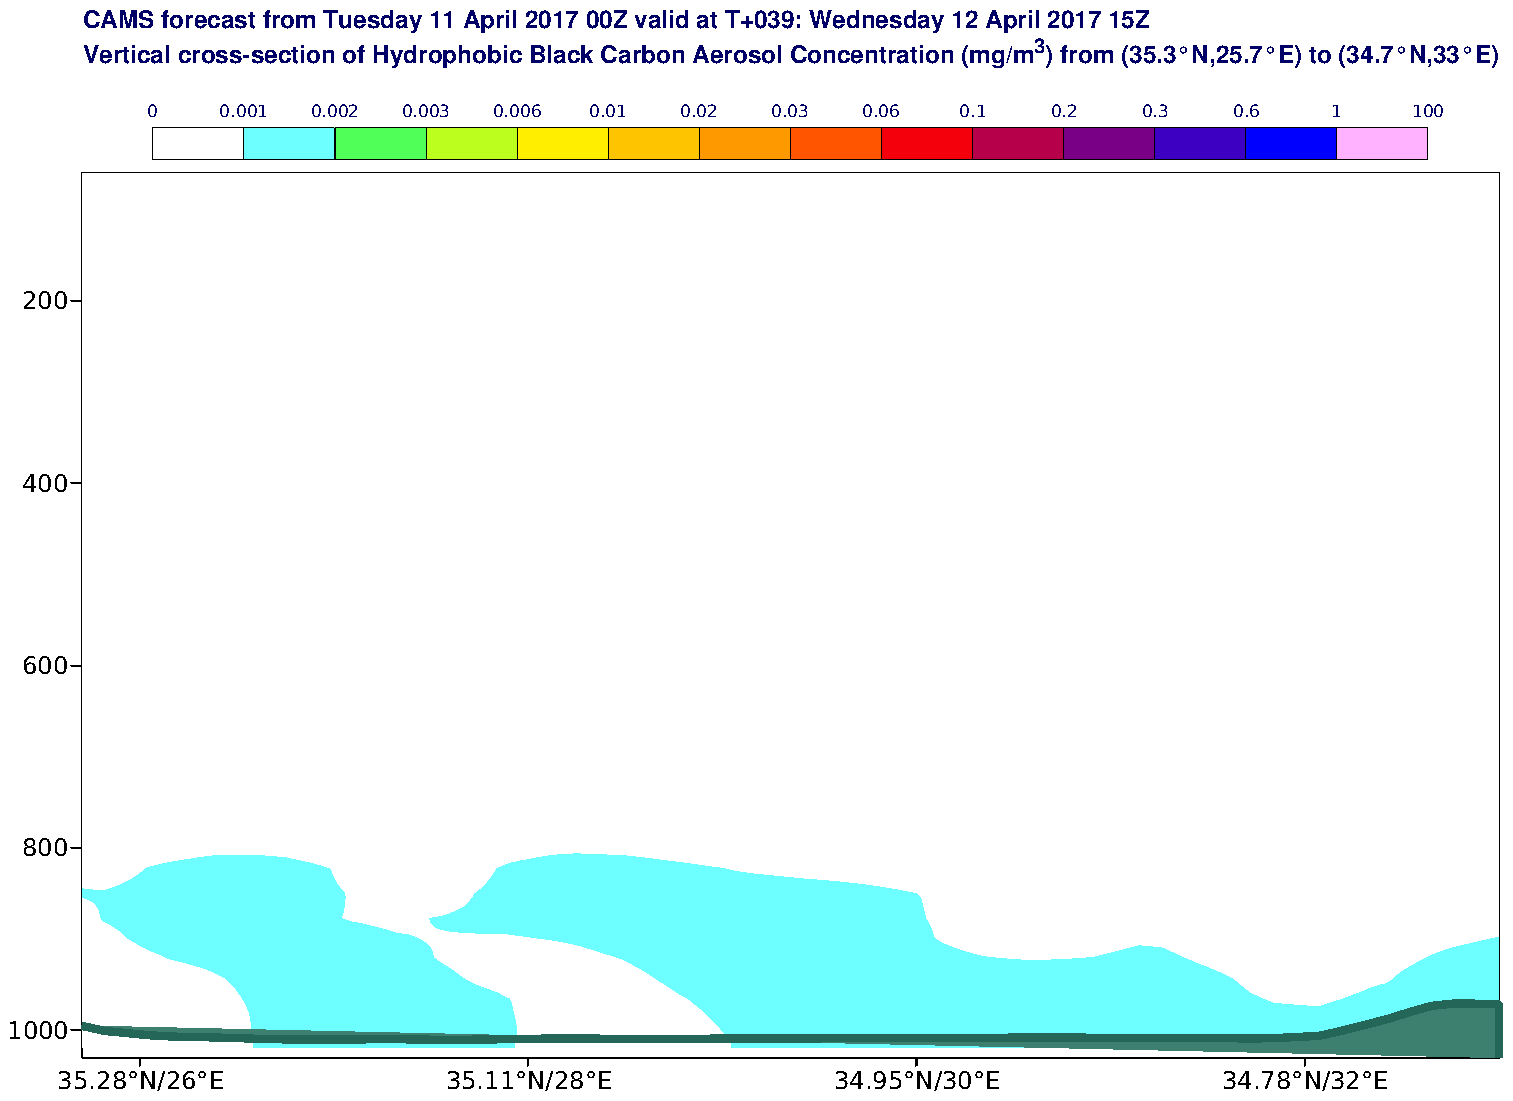 Vertical cross-section of Hydrophobic Black Carbon Aerosol Concentration (mg/m3) valid at T39 - 2017-04-12 15:00